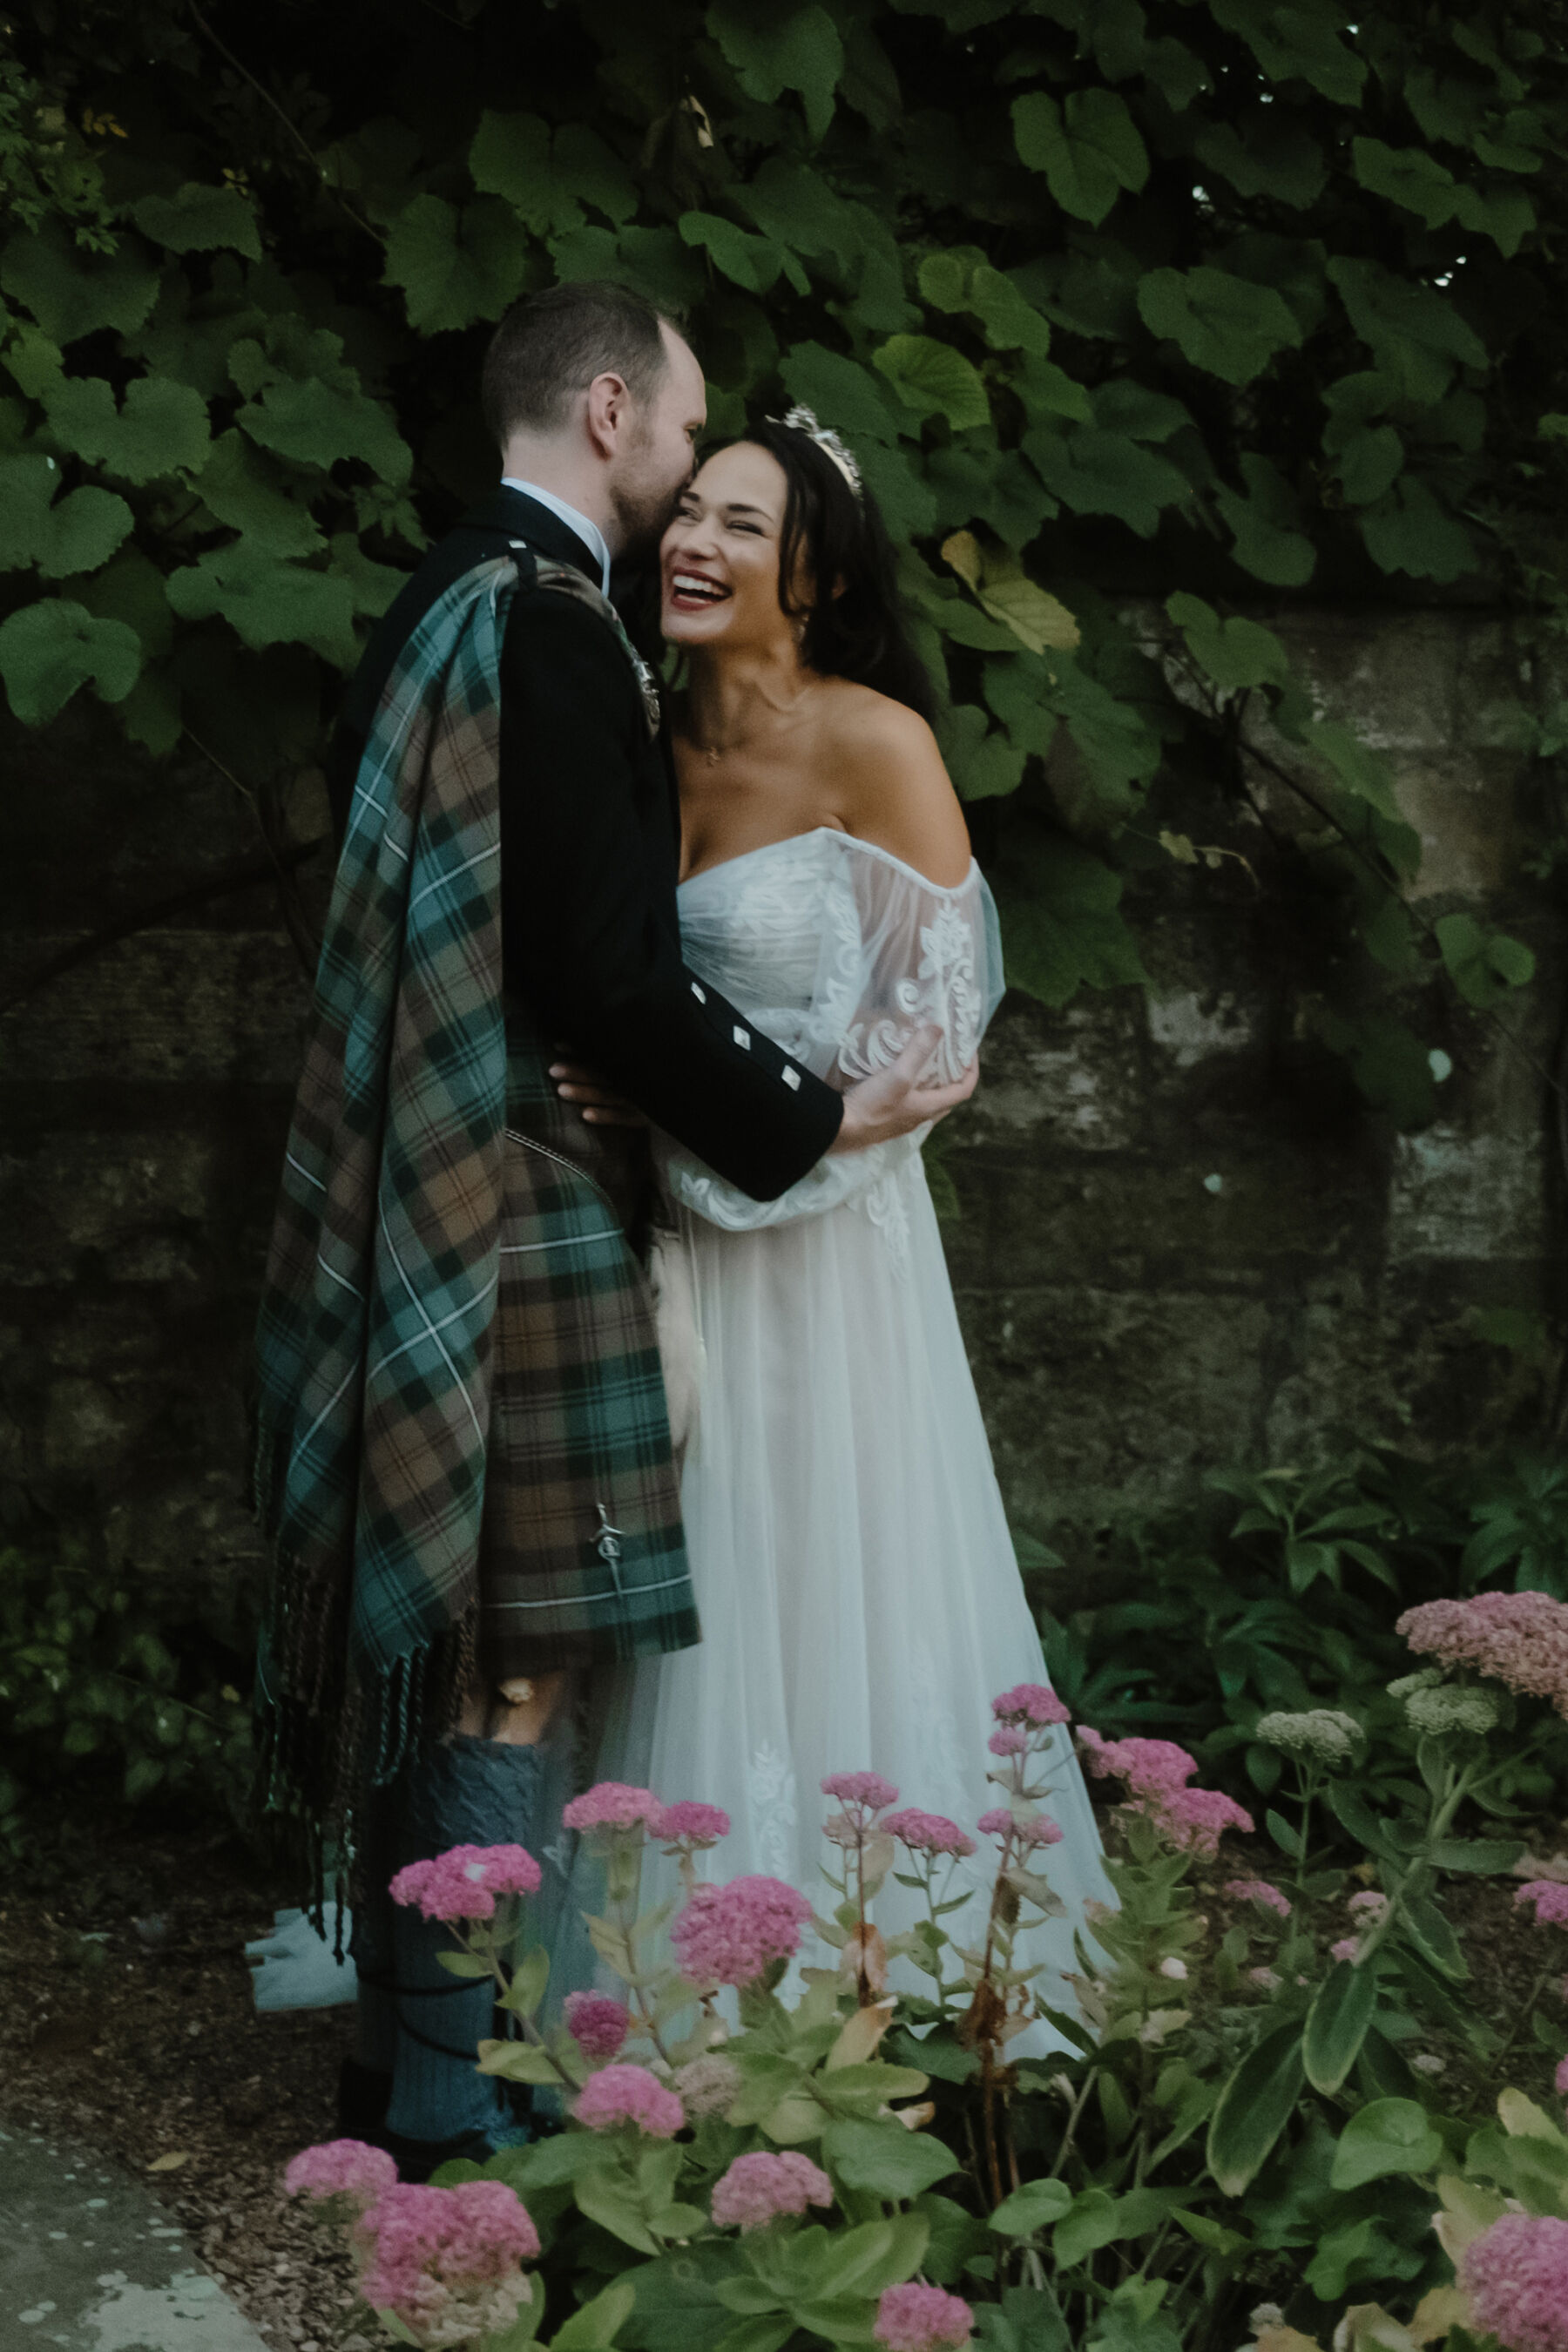 Groom wearing a green and blue tartan fly plaid and embracing his joyful smiling bride who wears an off the shoulder, boho style wedding dress by Willowby by Watters. The couple are standing next to a wall, trees and pink flowers in the grounds of the Cambo Estate, St Andrews, Scotland.